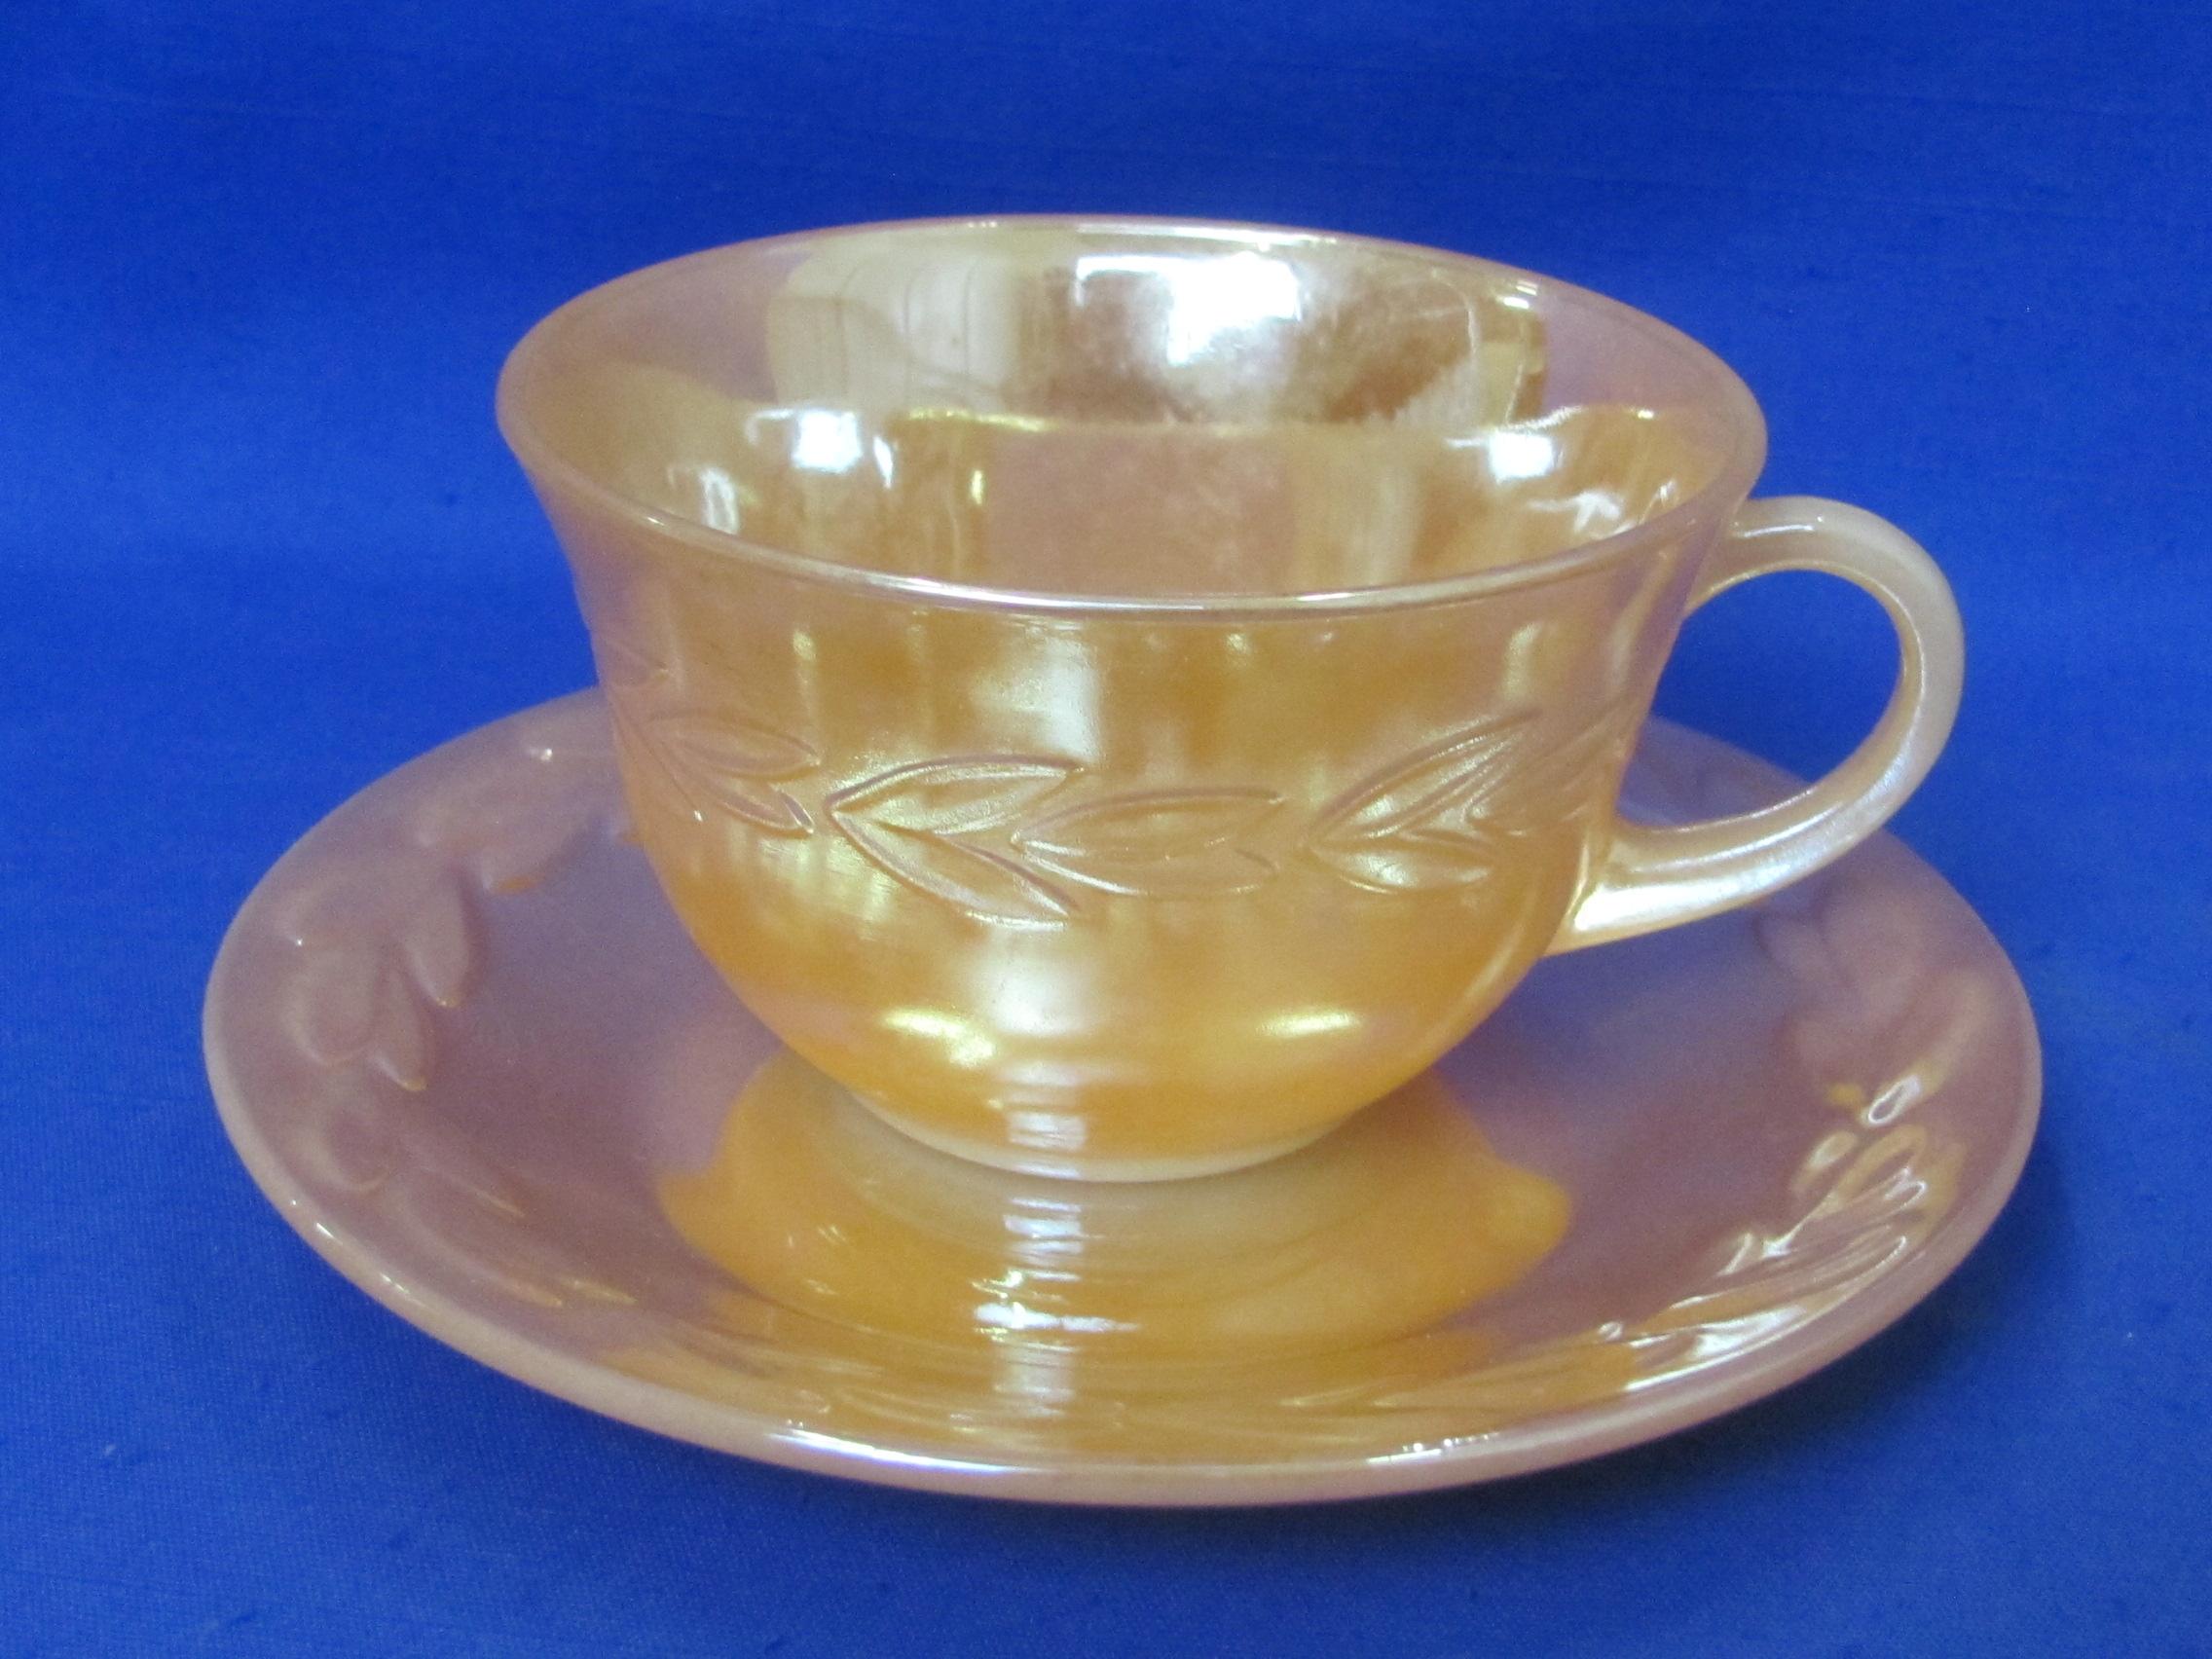 4 Cup & Saucer Sets – Fire-King Laurel in Peach Lustre – Cups are 2 1/4” tall